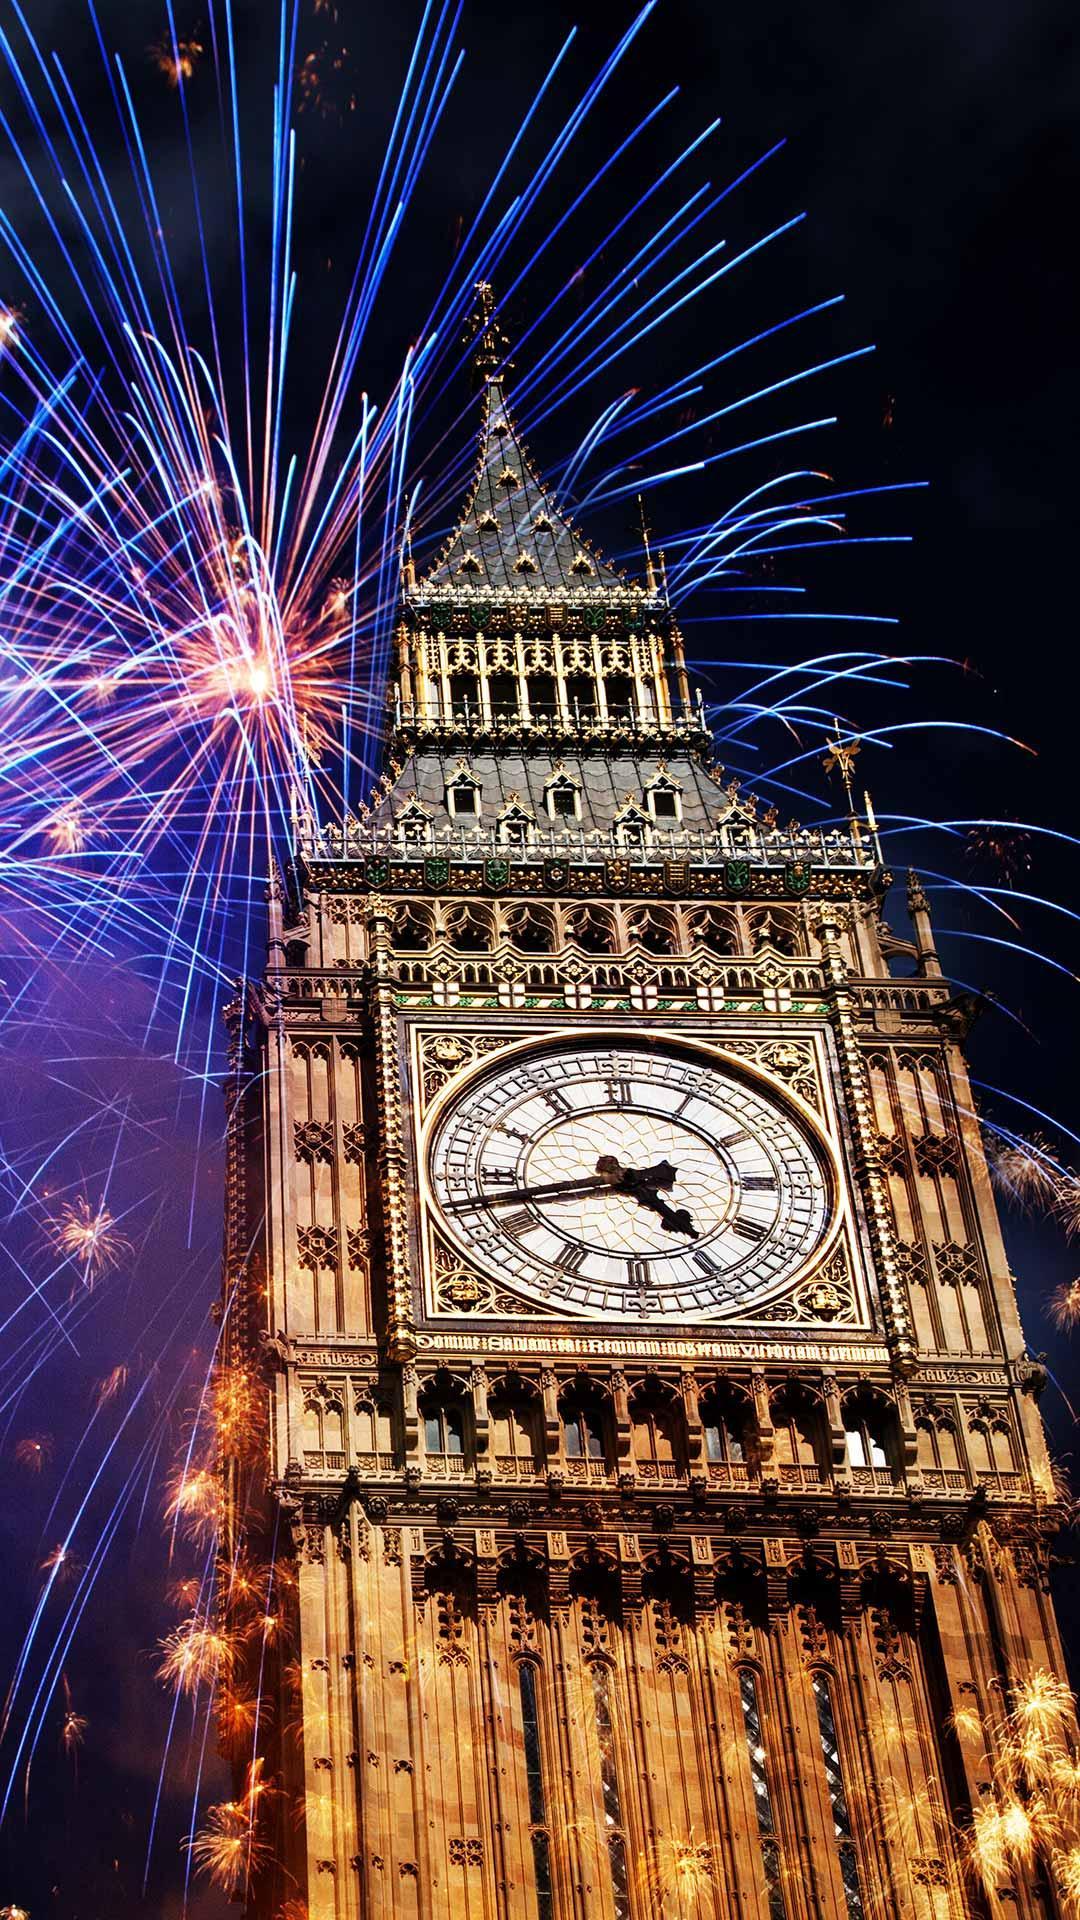 Fireworks Live Wallpaper for Android